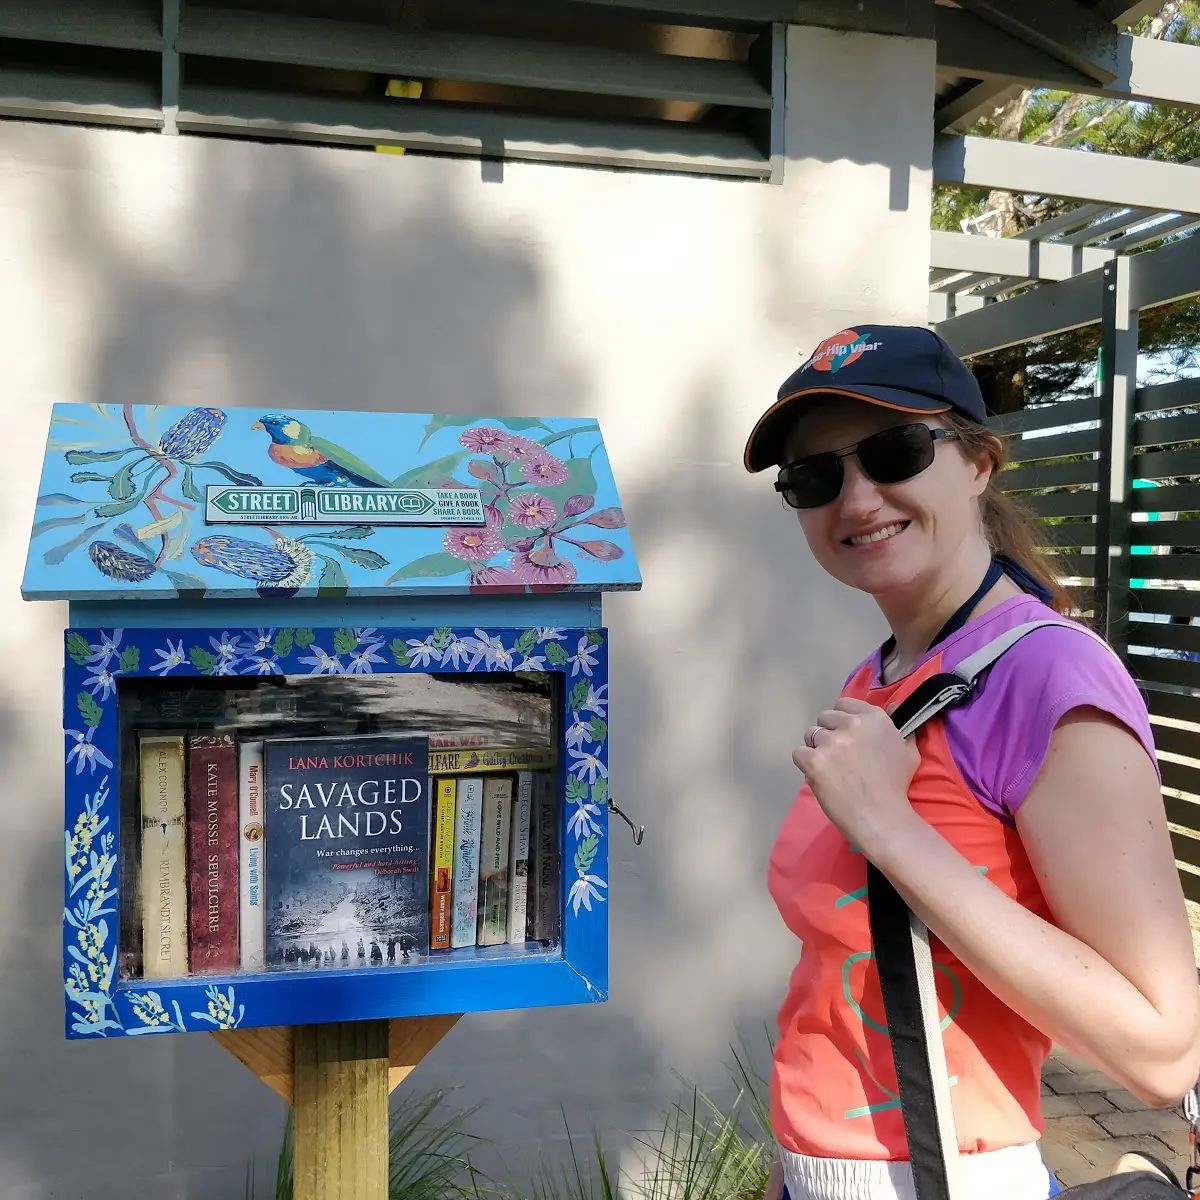 #tbt 4 years ago today, receiving copies of my self-published novel in the mail and placing one in the street library at Pearl Beach. When I came back from my swim, it was gone and I was so excited someone took it home. A year later this story was picked up by Harper Collins and became my debut novel, Sisters of War

#books #bookstagram #bookofinstagram #HistoricalFiction #wwii #wwiifiction